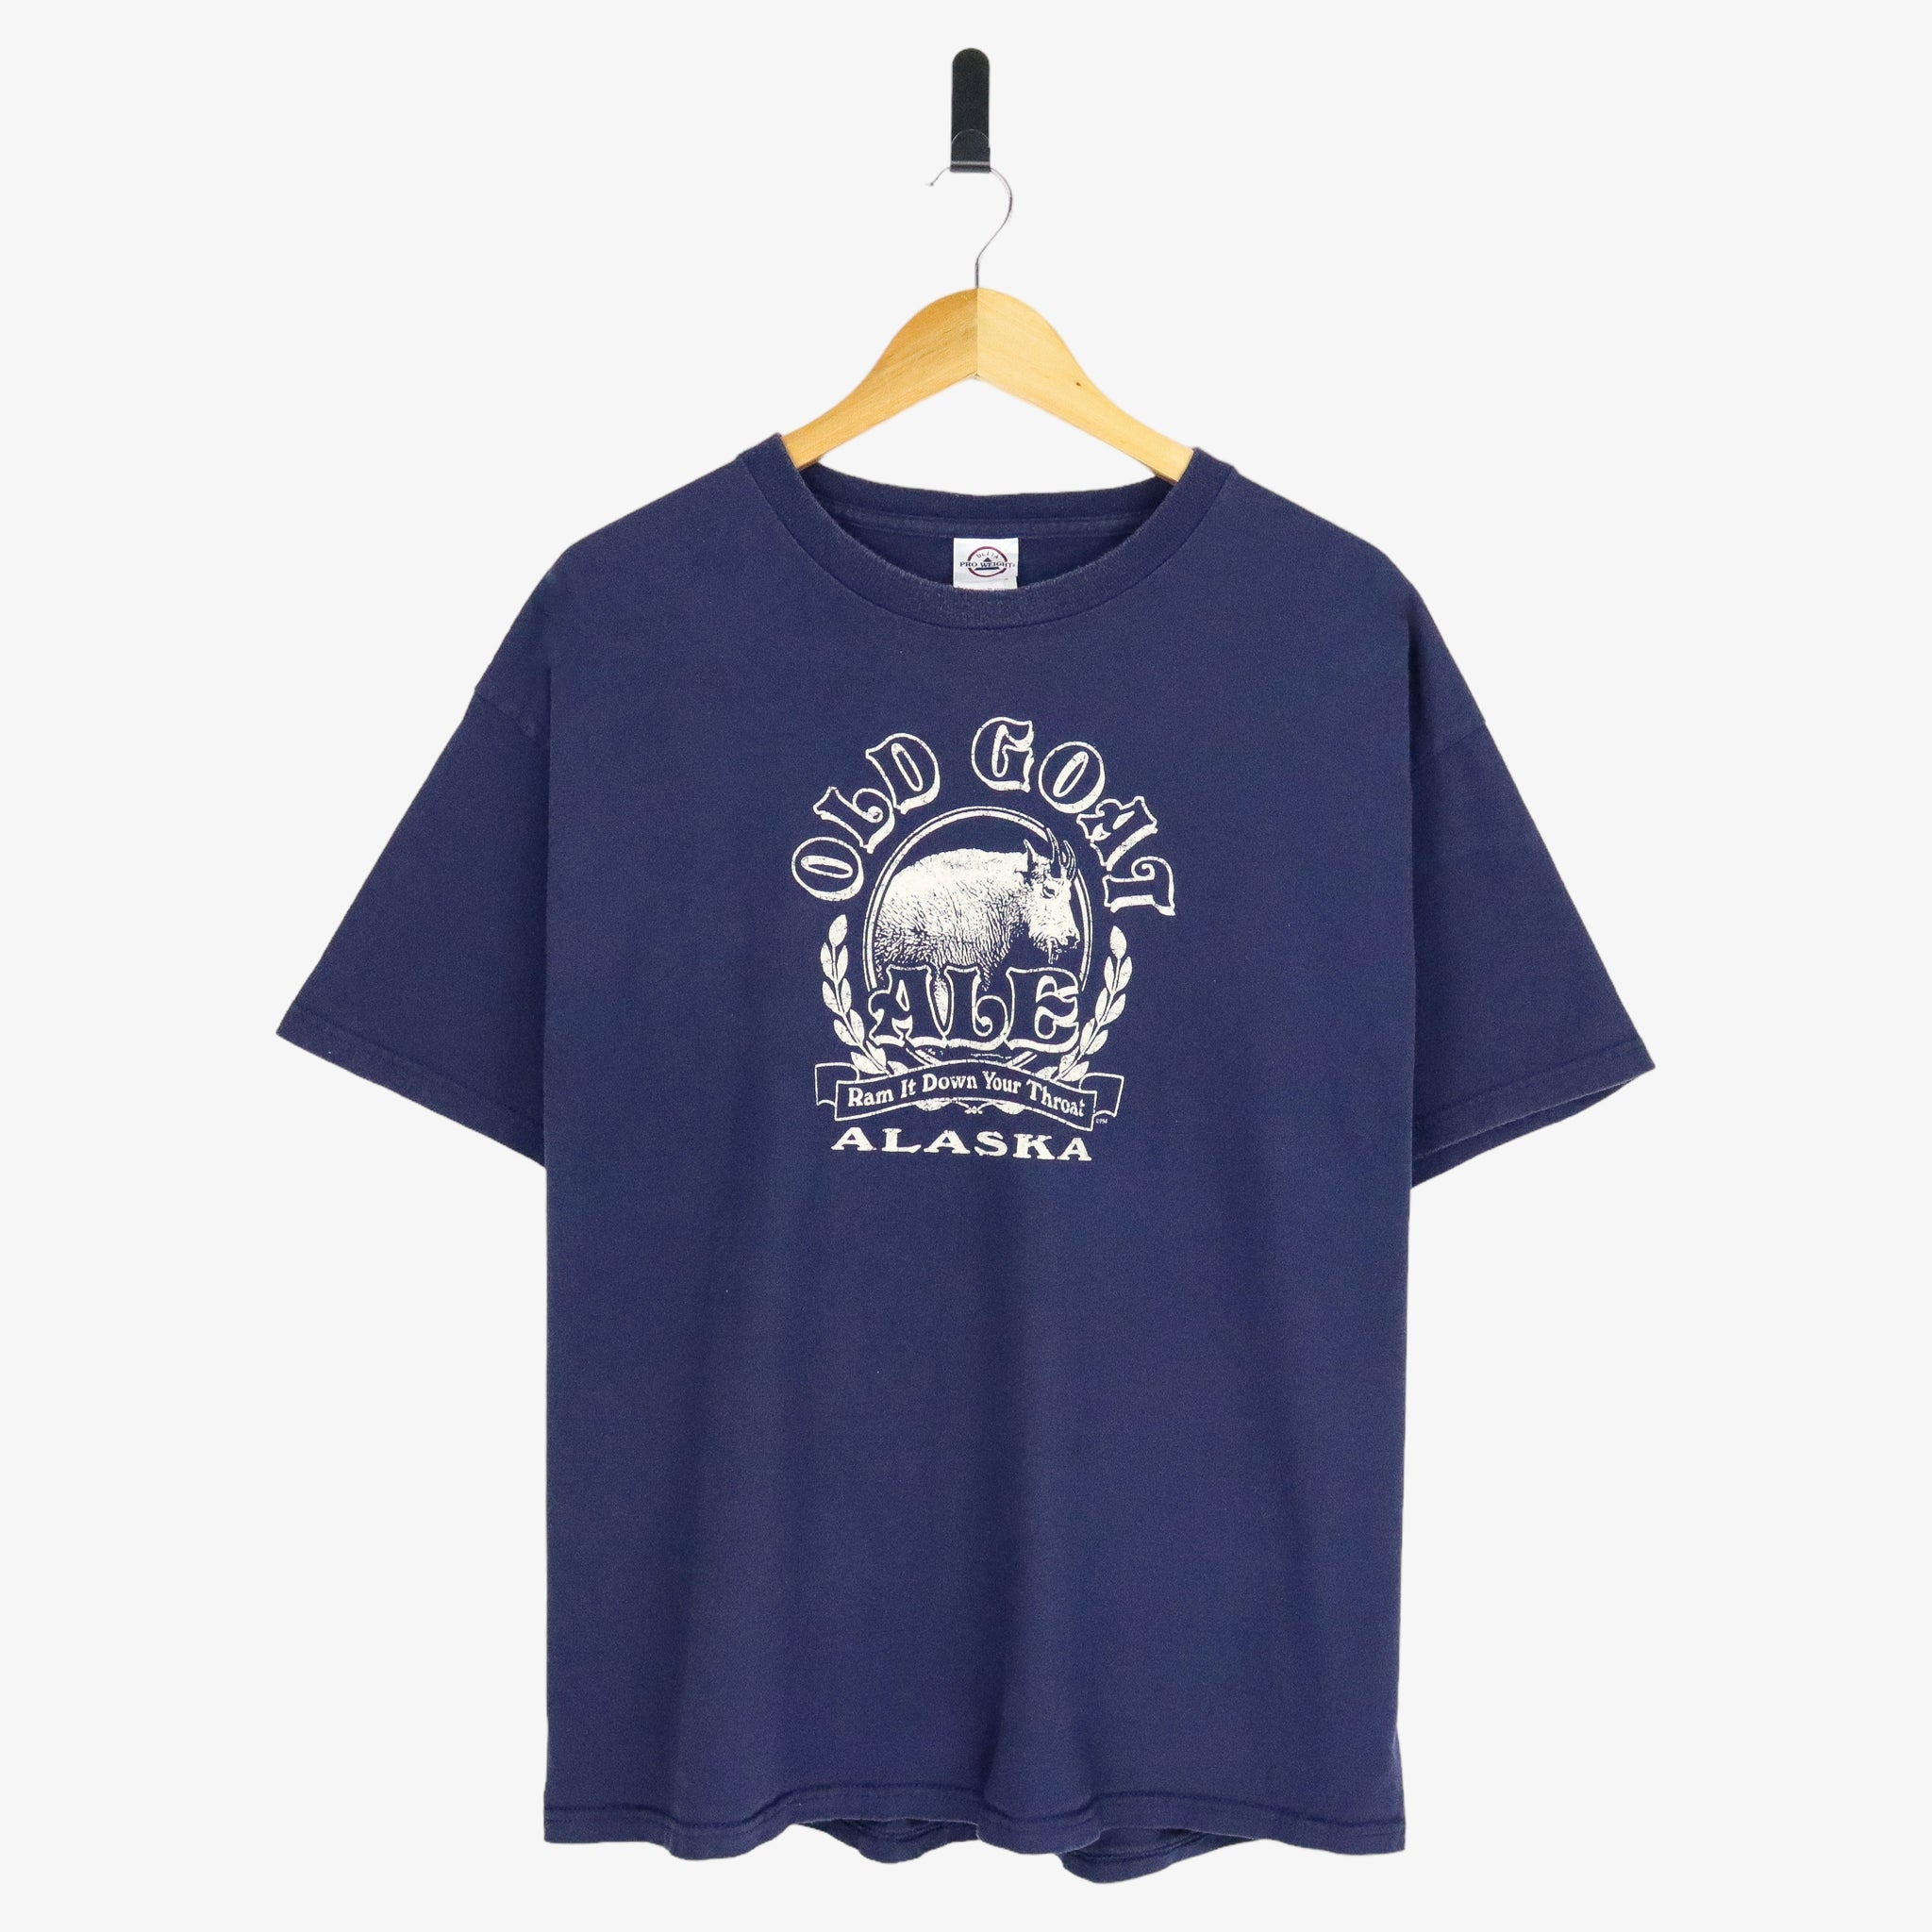 Old Goat Ale Alaska Graphic SS-Tee (XL)